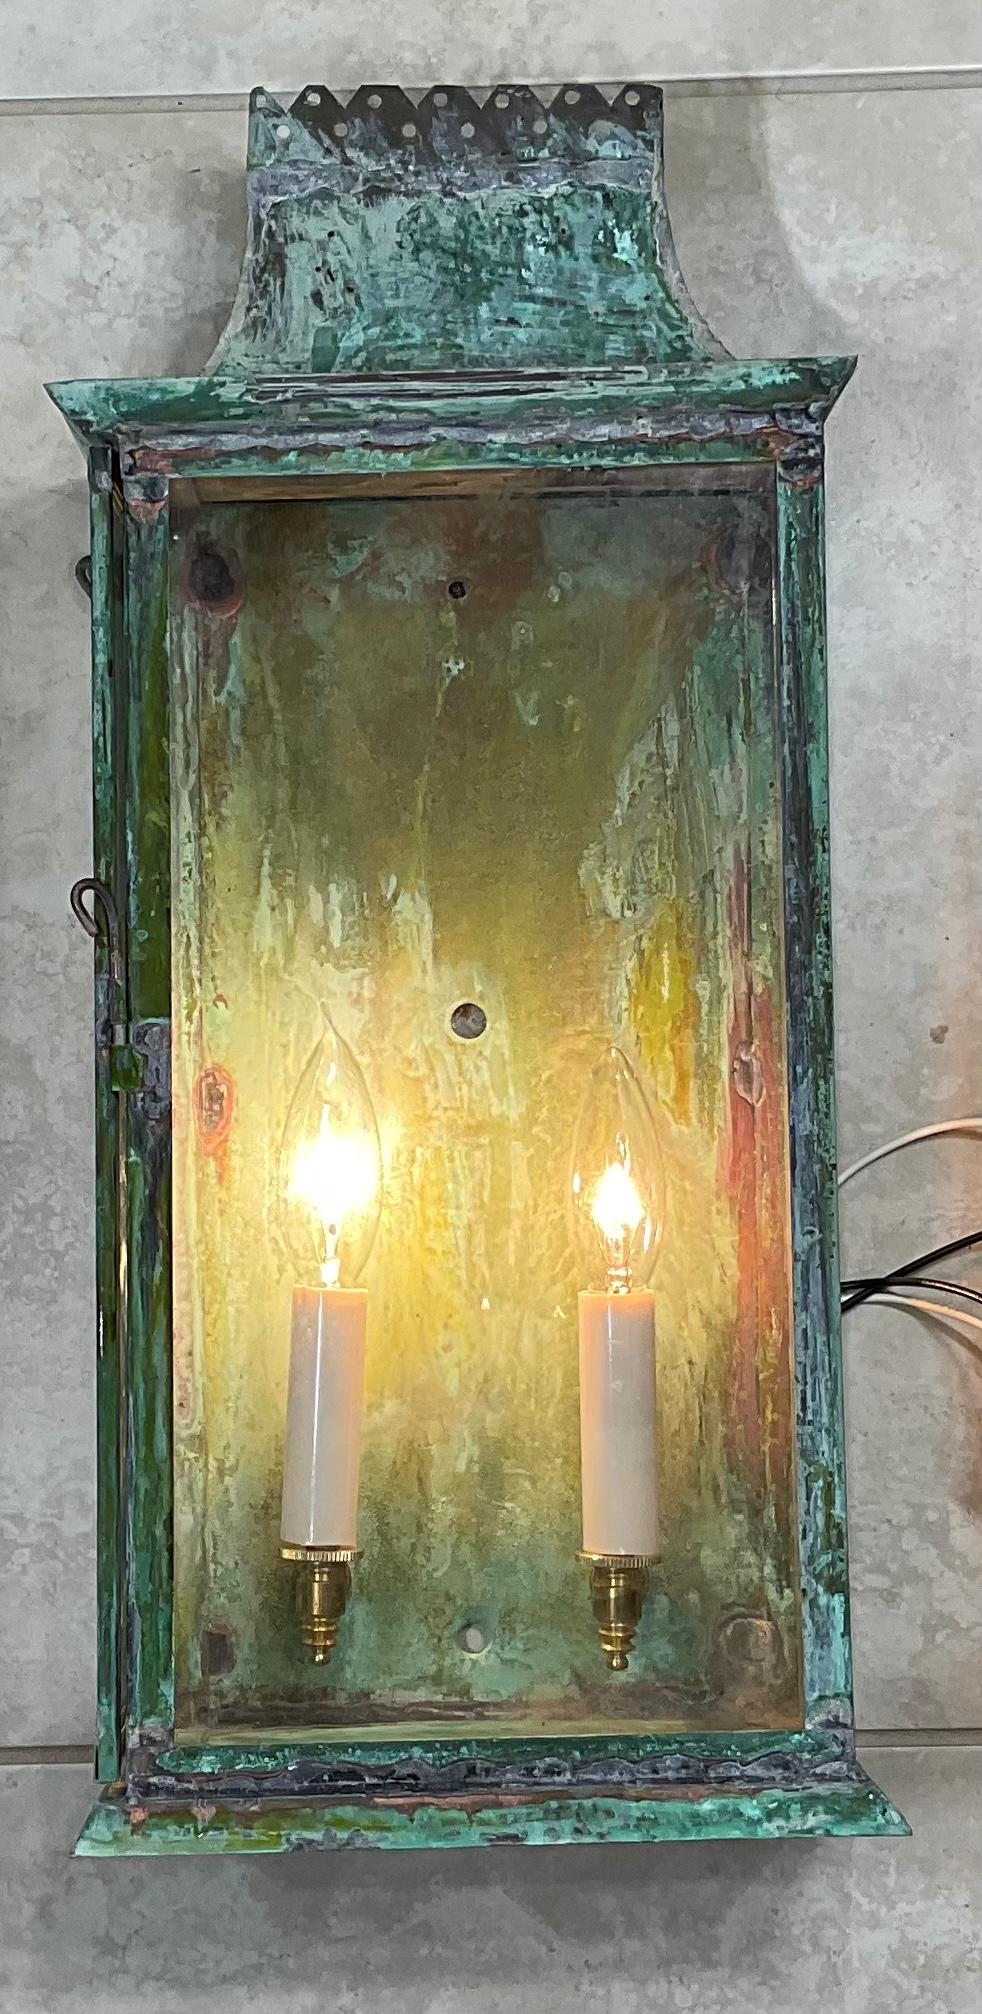 Hand crafted wall lantern made of solid copper, two 60/watt lights, clear glass, new electric hardware, suitable for wet location ready for use. Beautiful green oxidization patina.